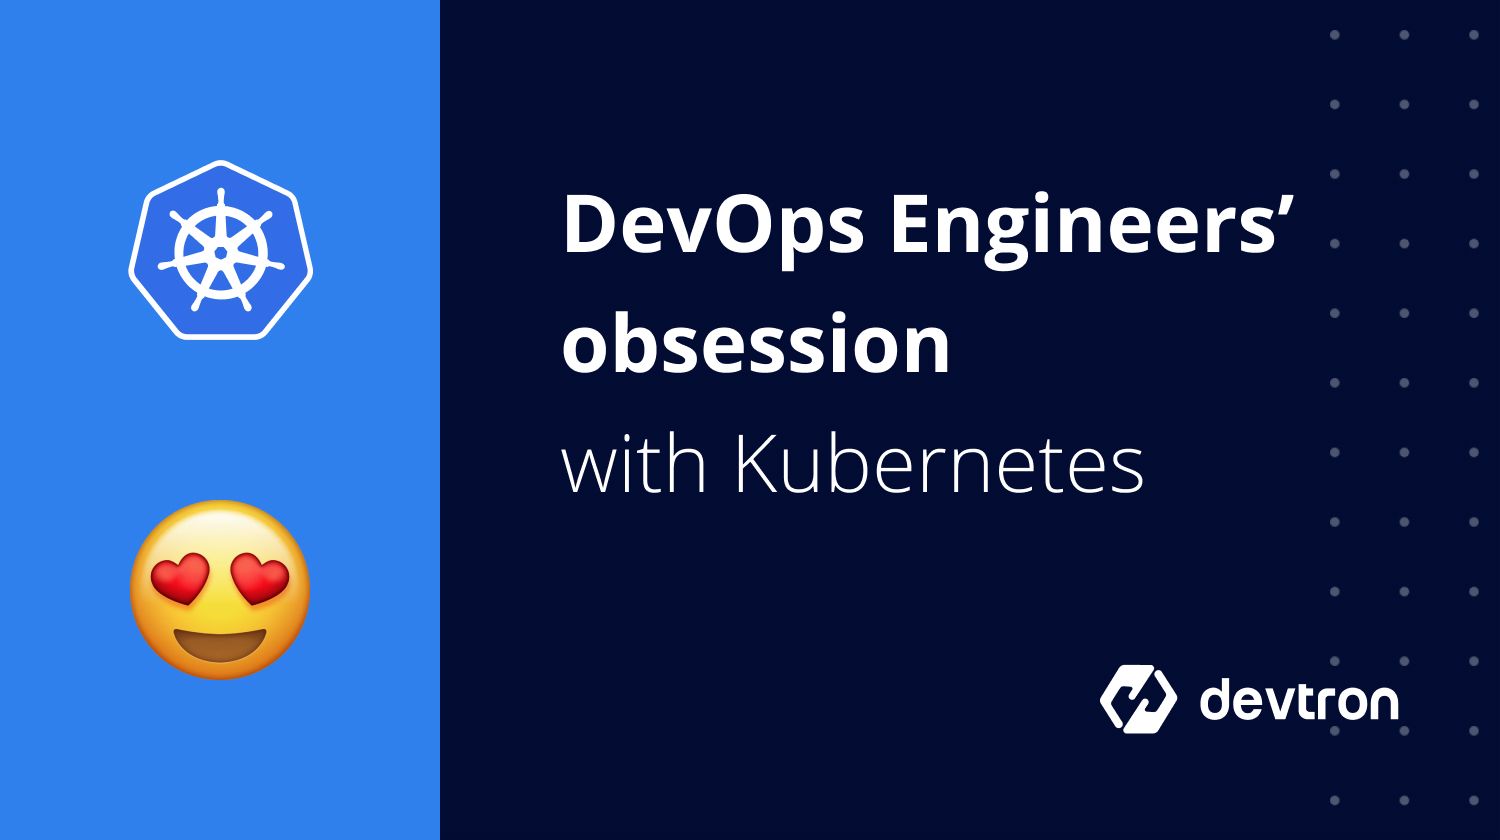 Why DevOps Engineers so Obsessed with Kubernetes and so are we?